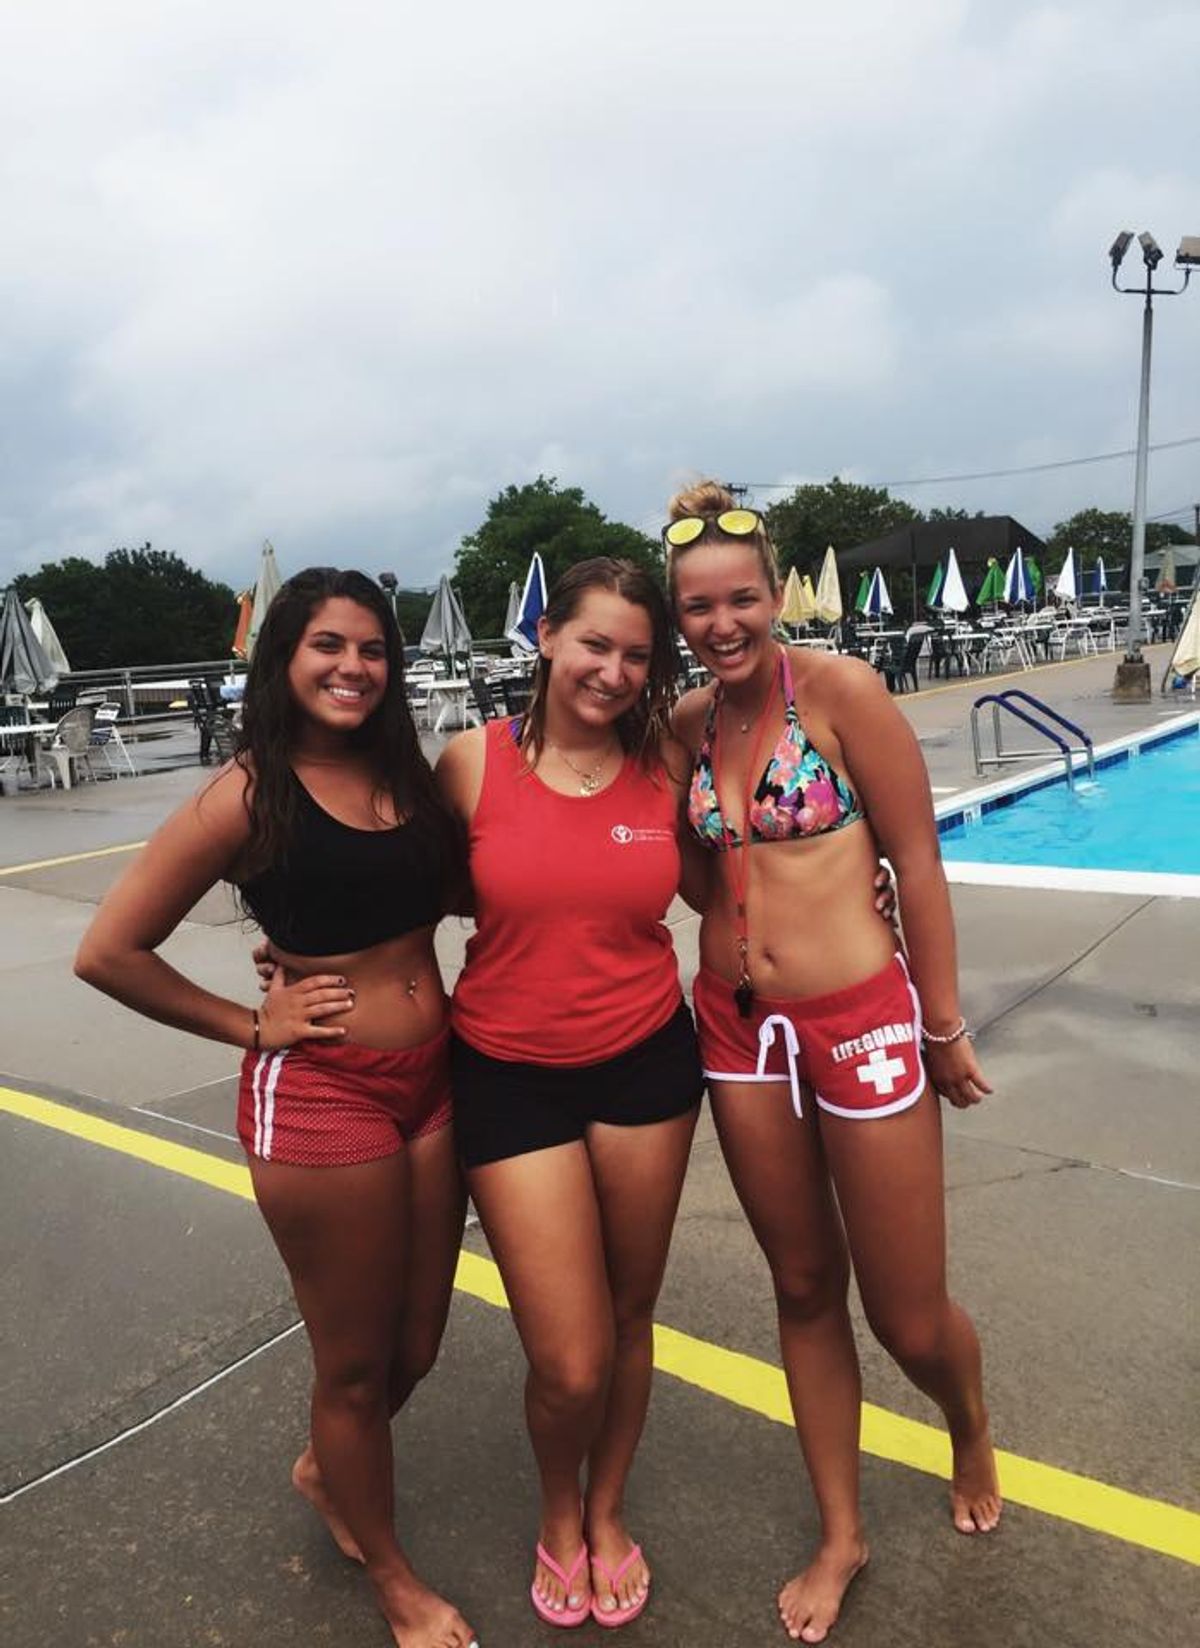 7 Struggles Of Being A Lifeguard